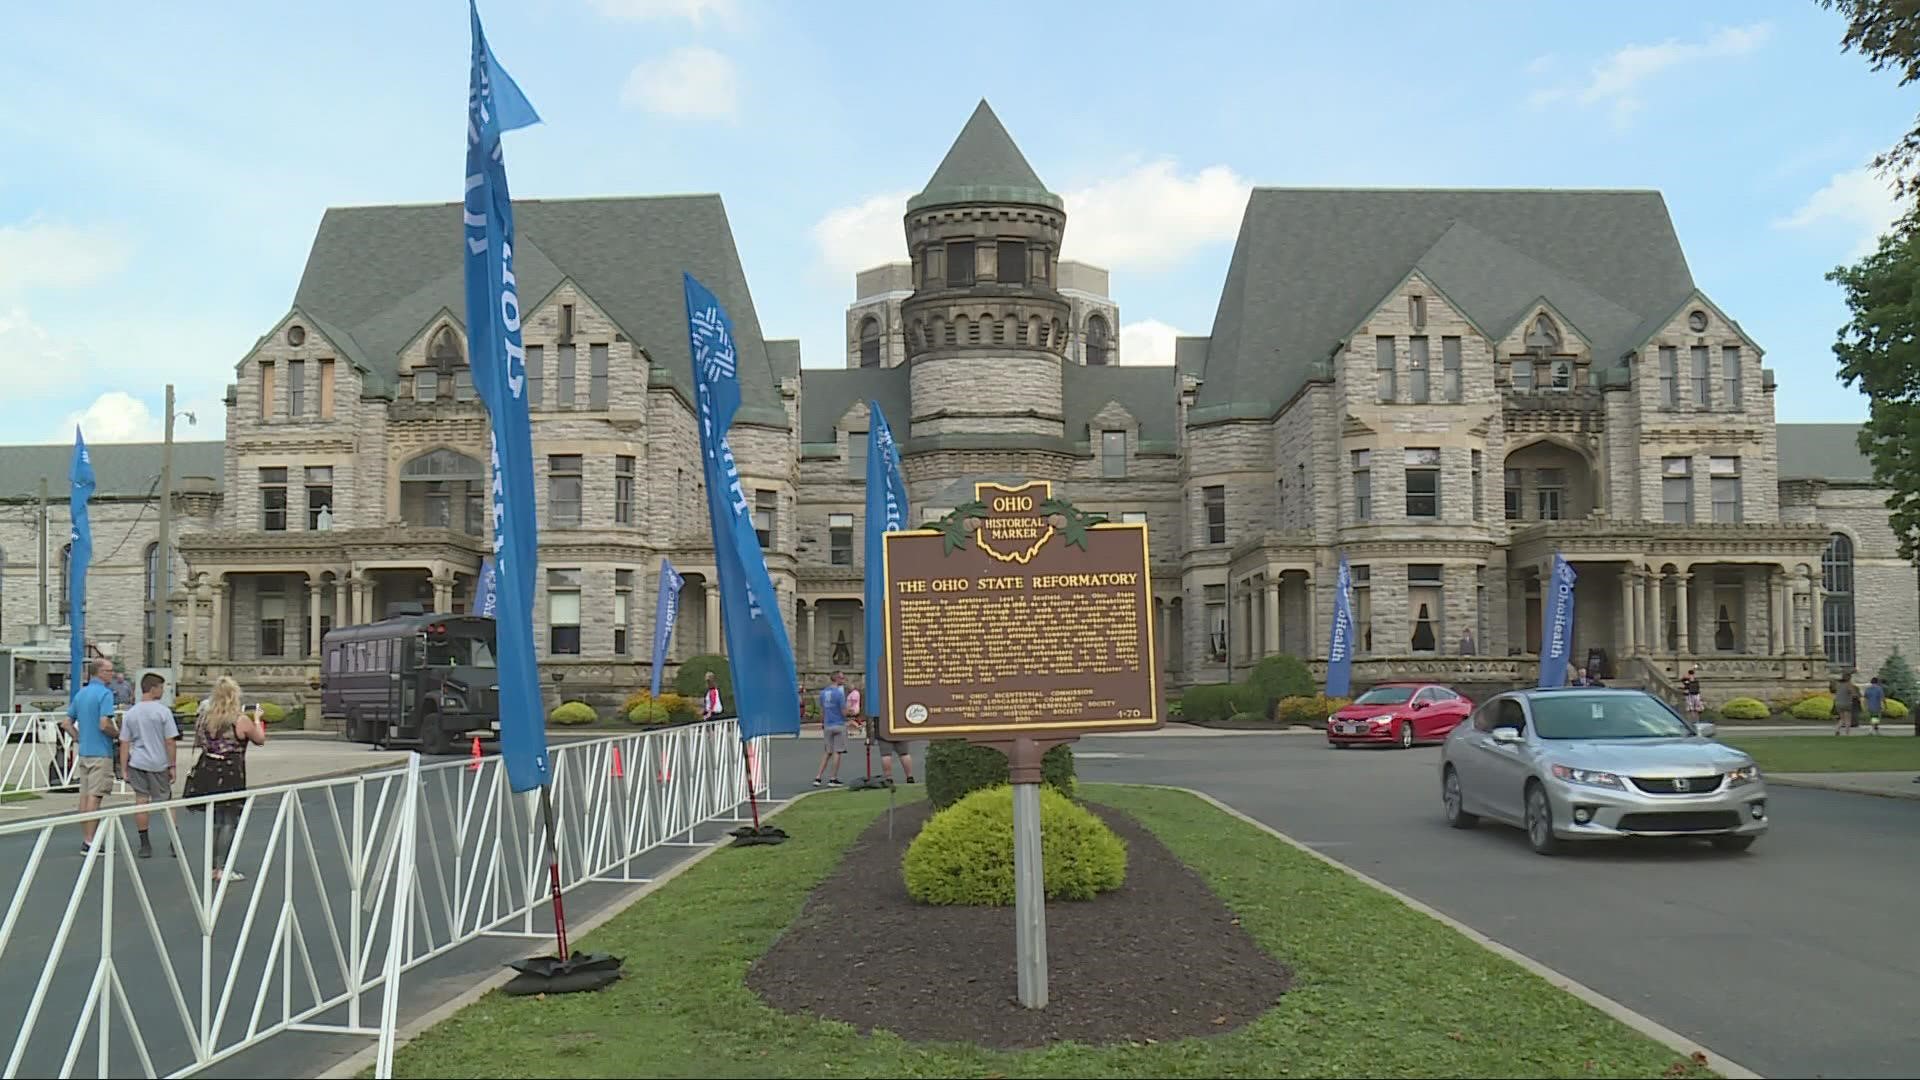 "Welcome to Shawshank.” Get ready to explore movie magic as a bus tour of The Shawshank Redemption filming locations in Ohio launches this June.